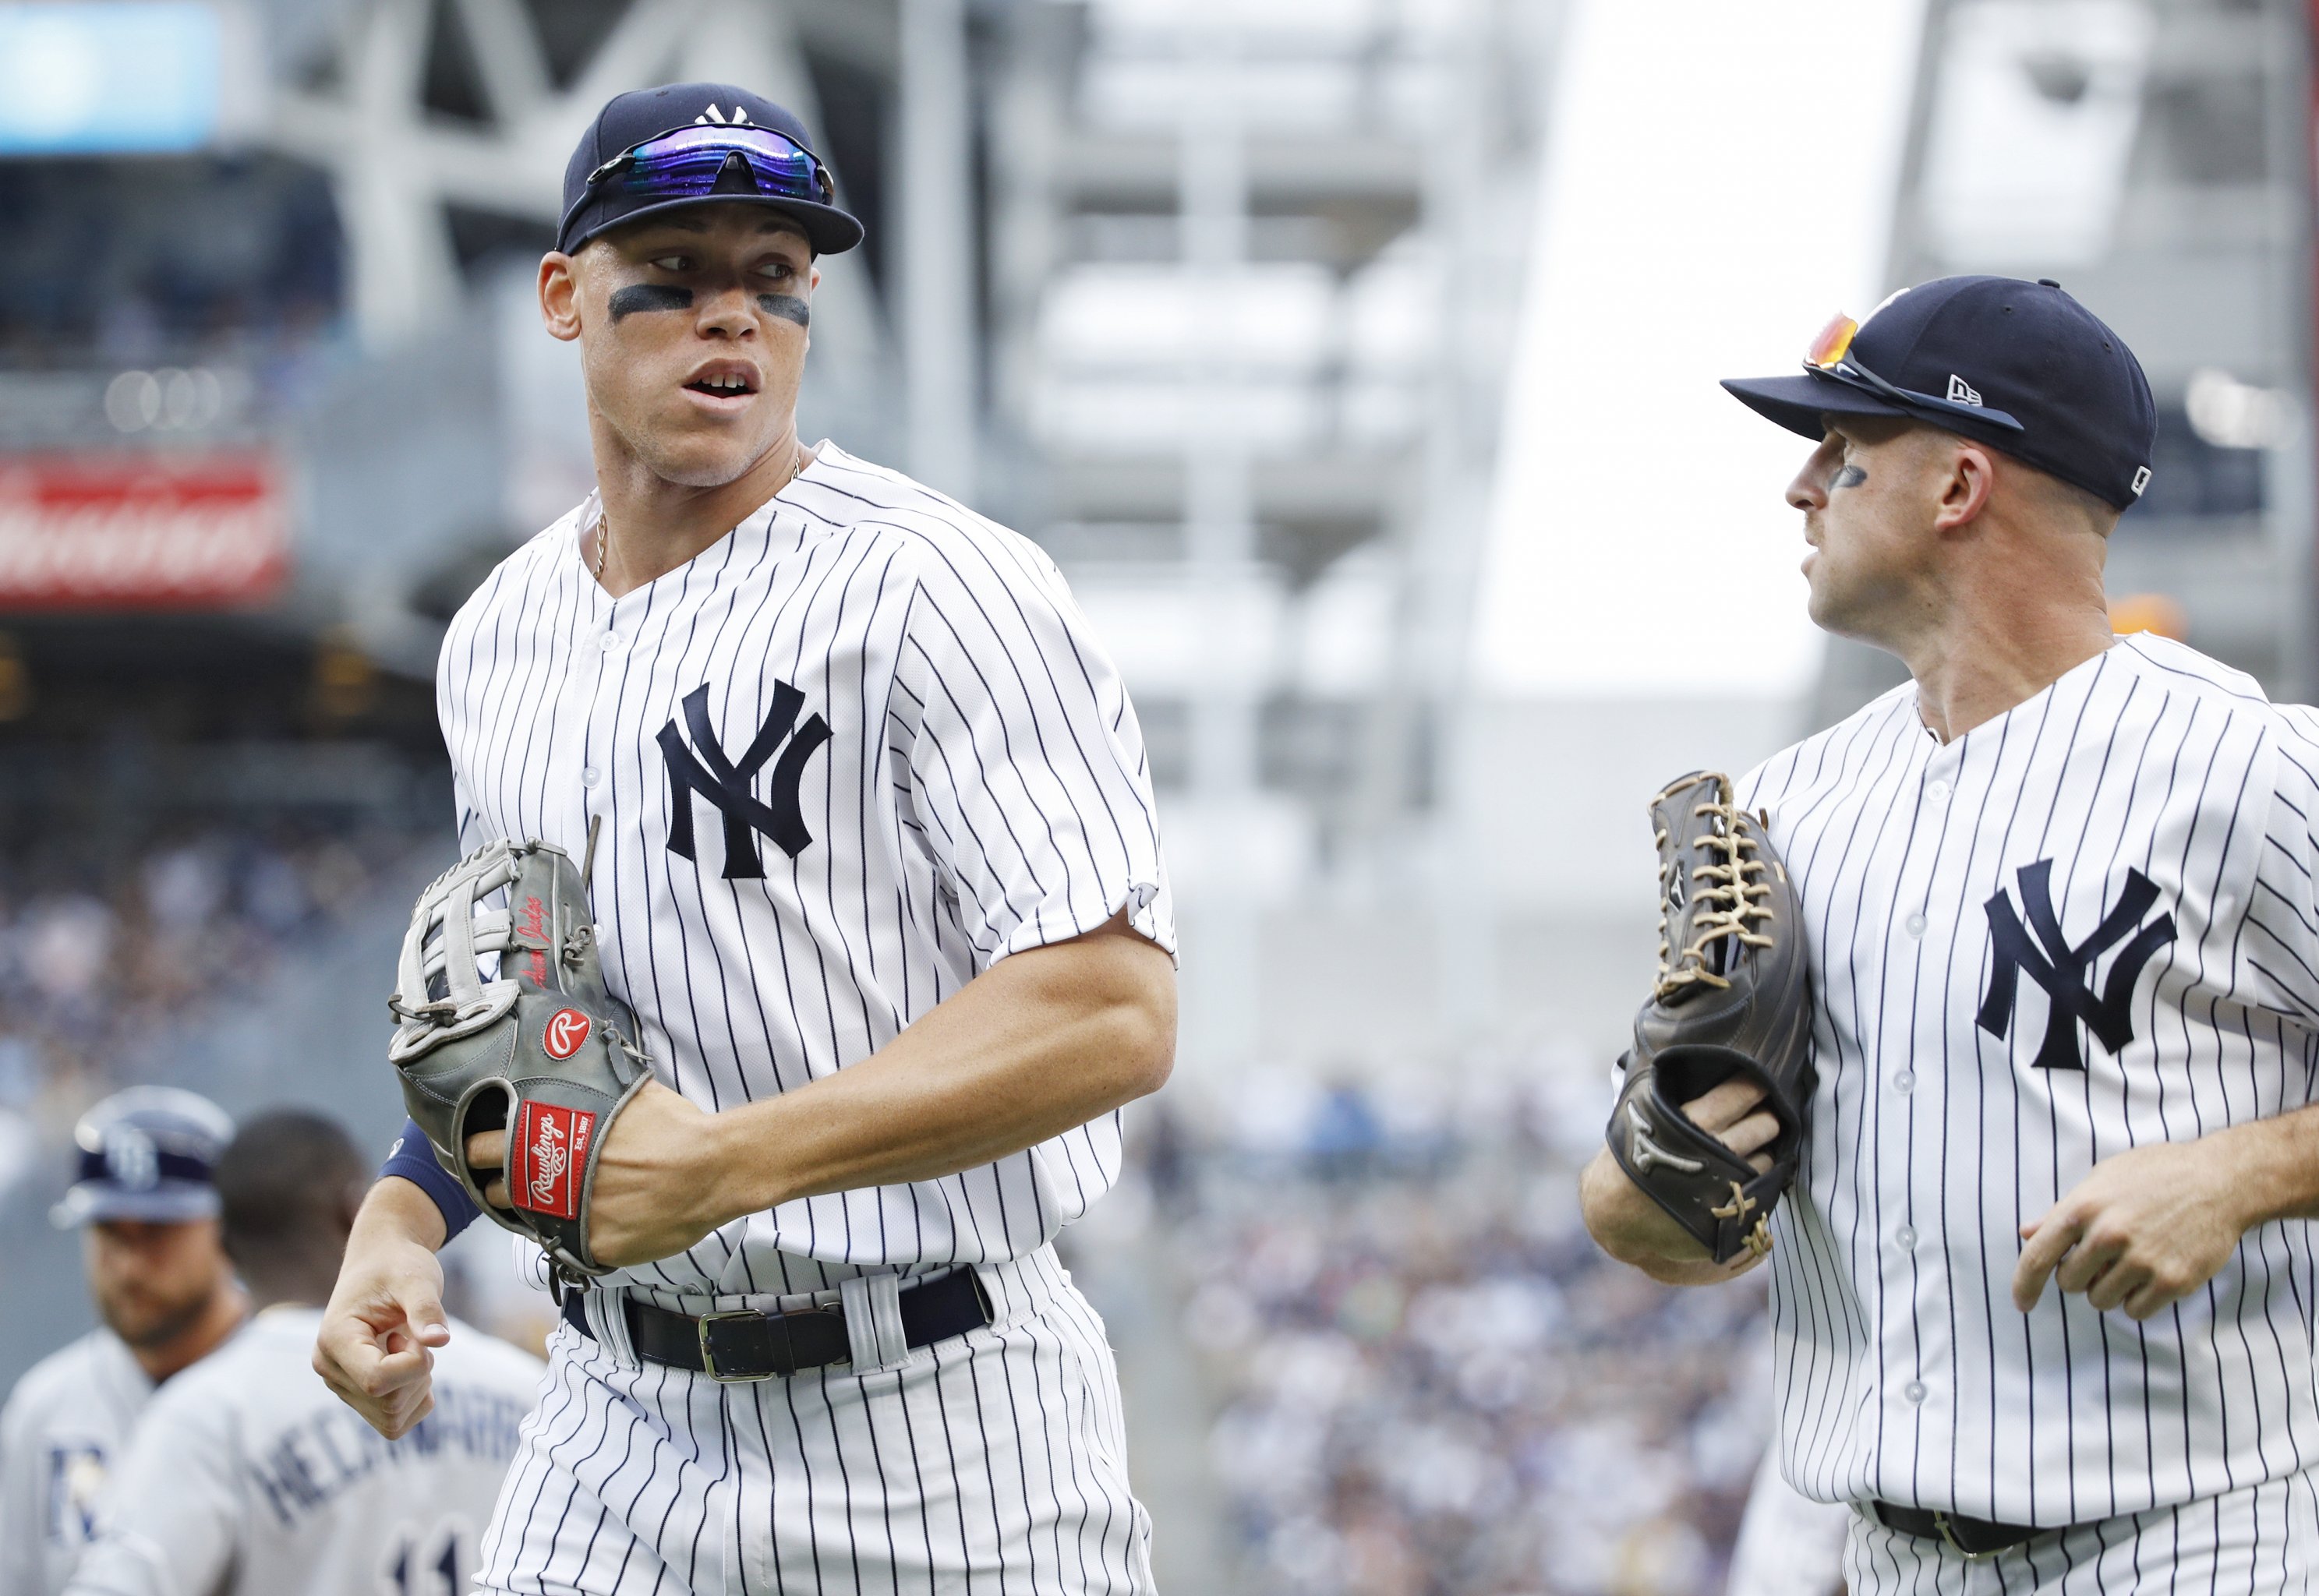 How 25-Year-Old Aaron Judge Became the Heir to Derek Jeter As the